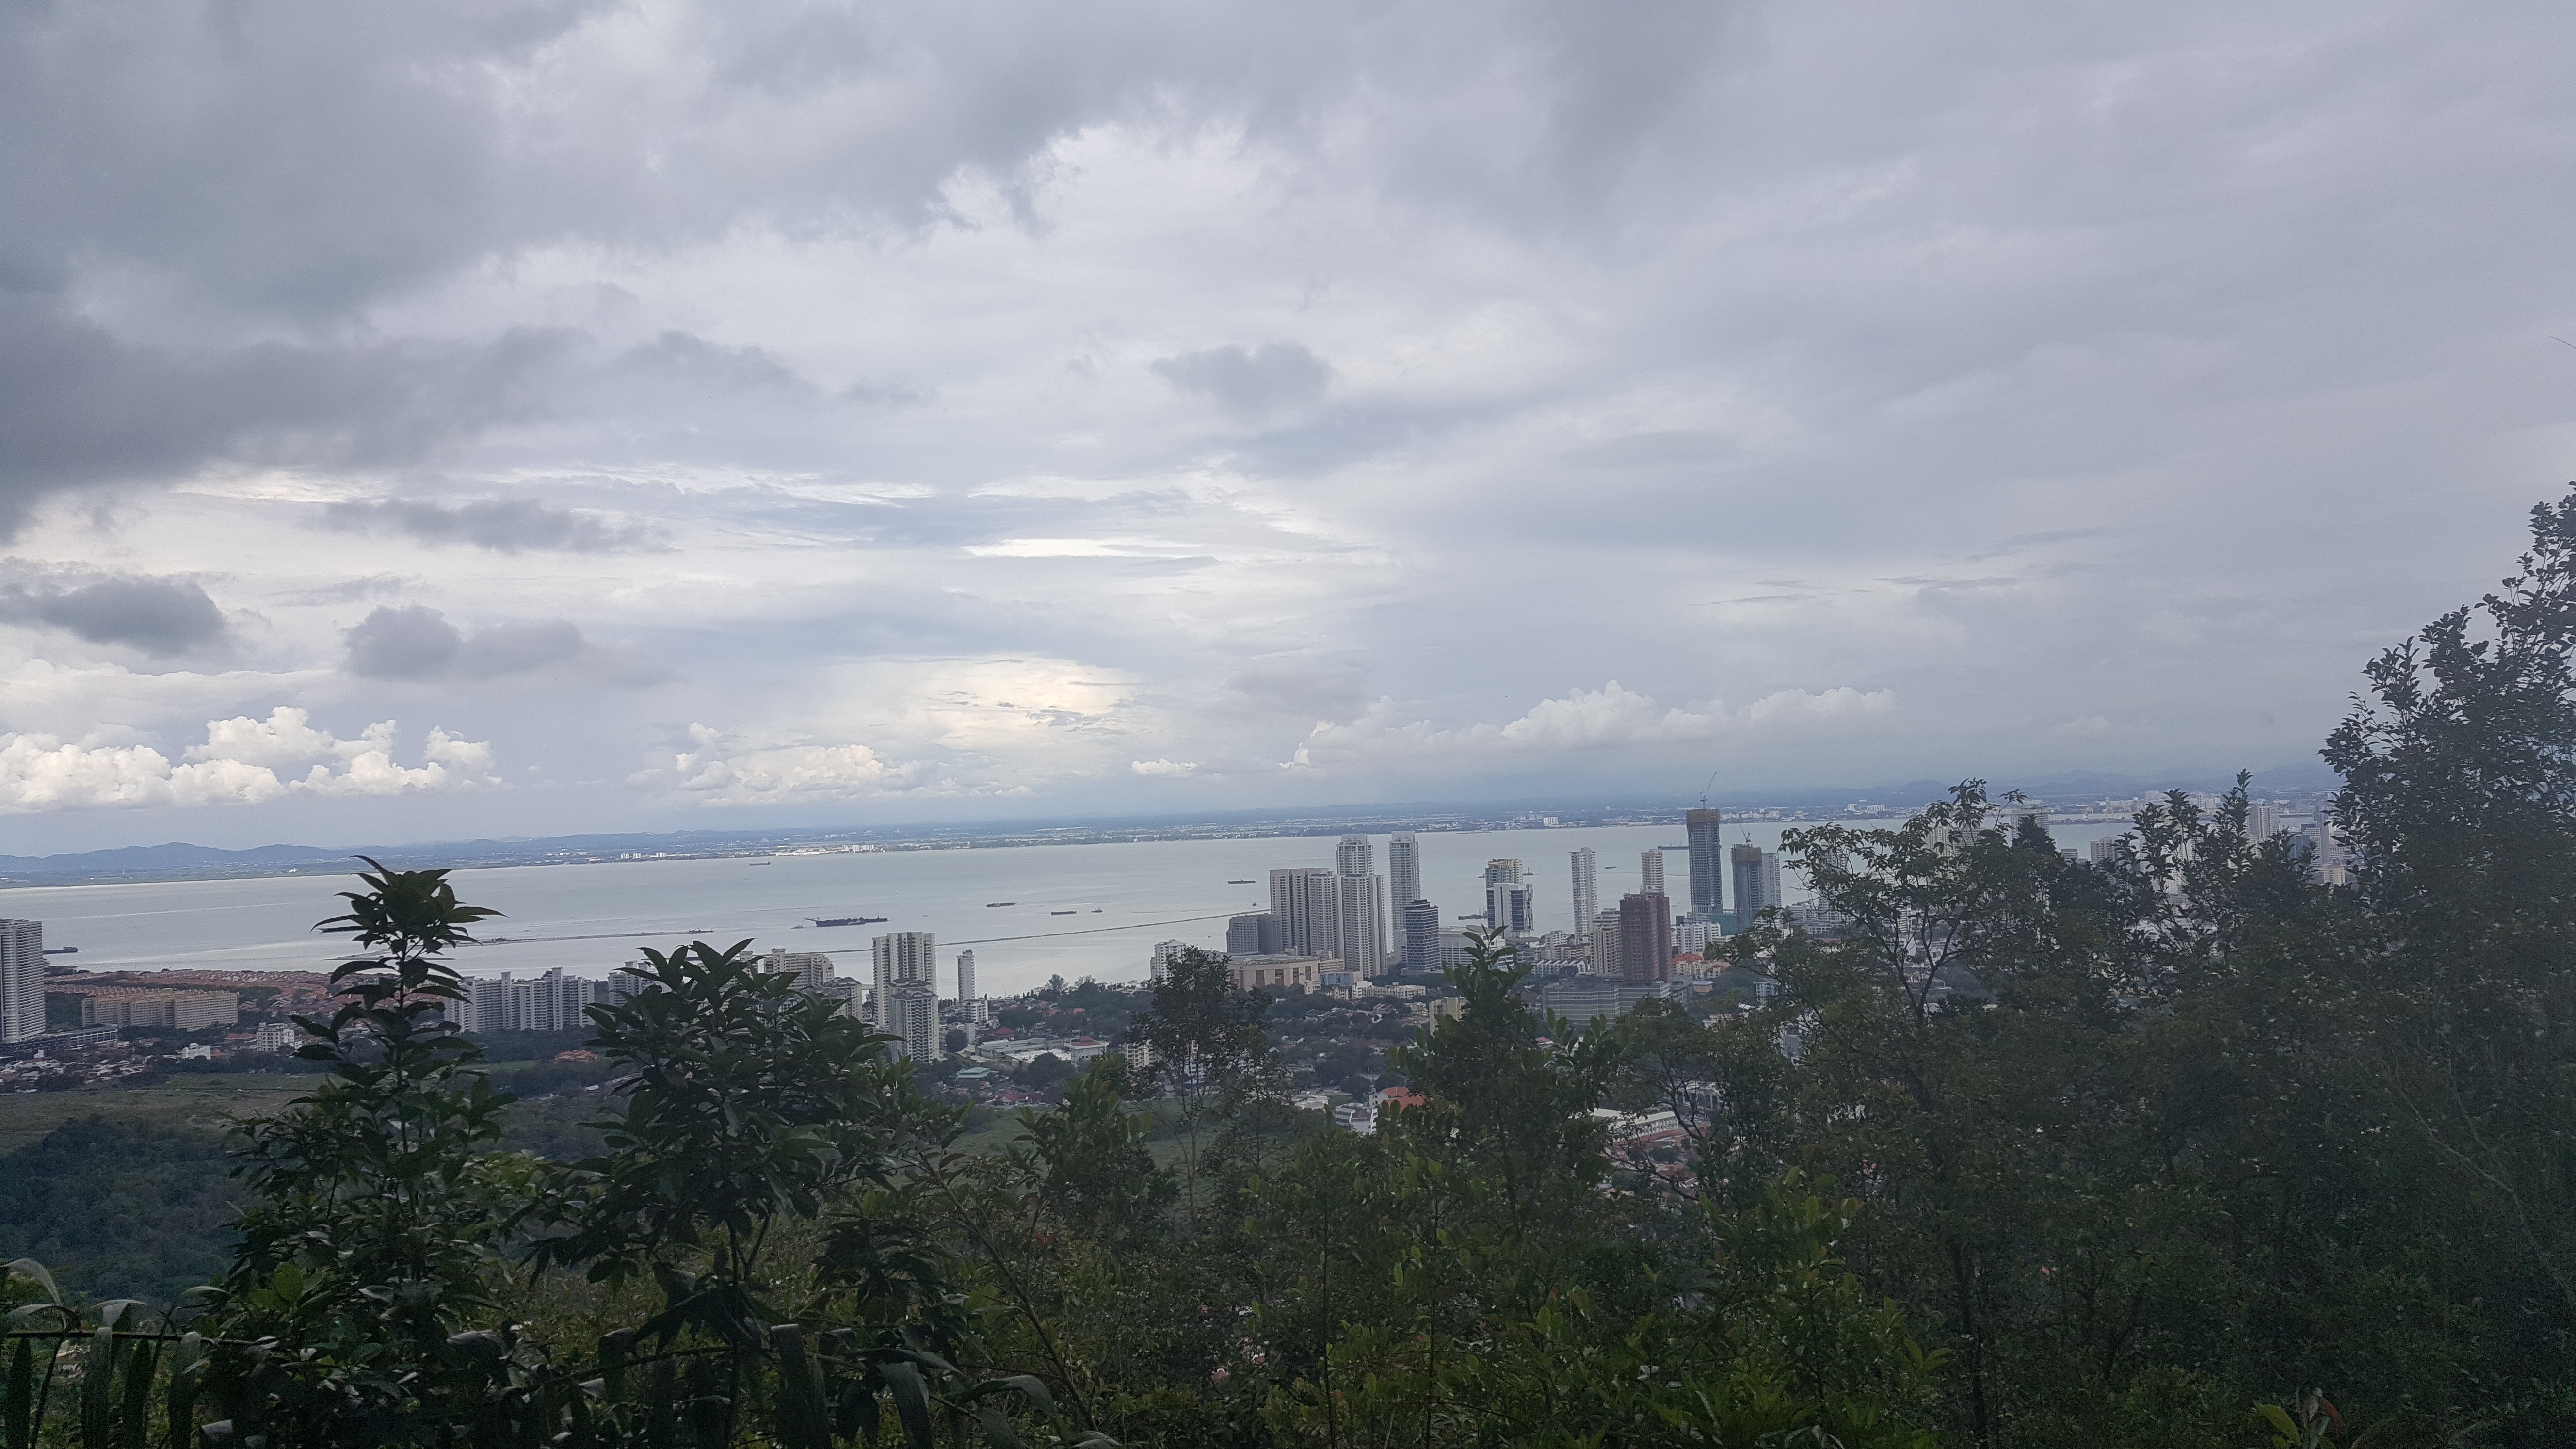 The view of Penang City on the way to Station 46